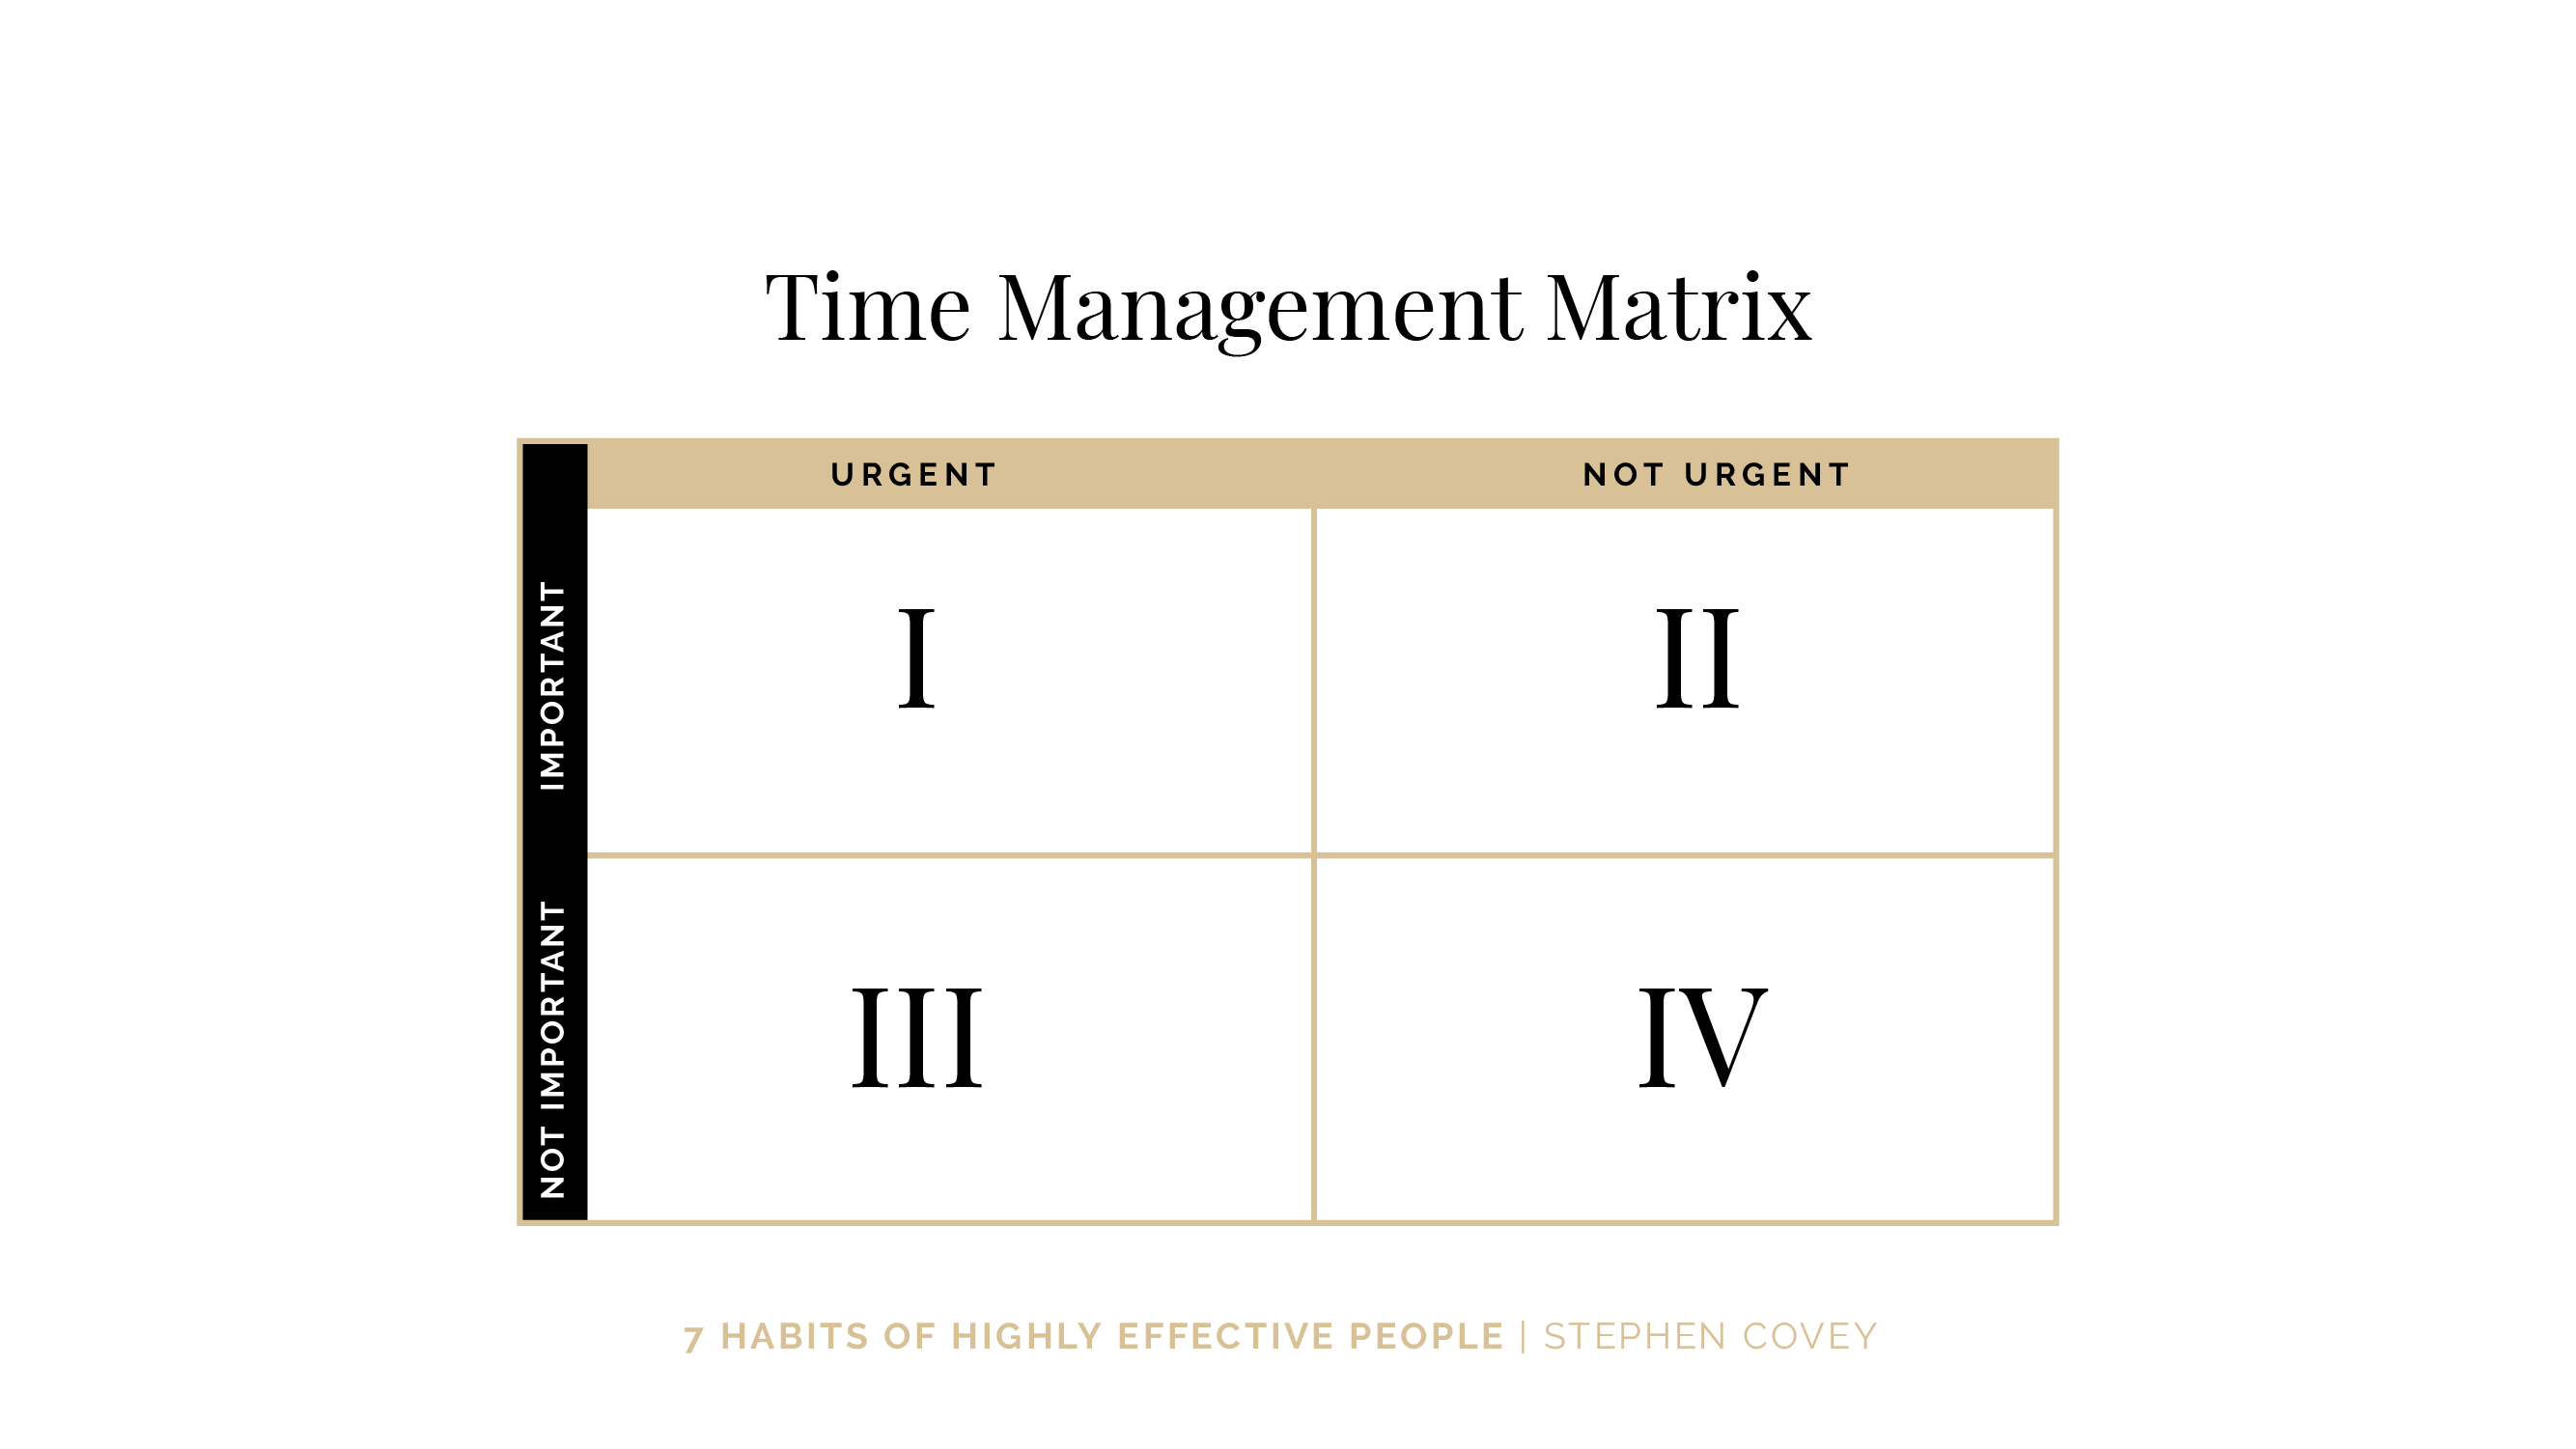 Time Management Matrix from Stephen Covey's 7 Habits of Highly Effective People